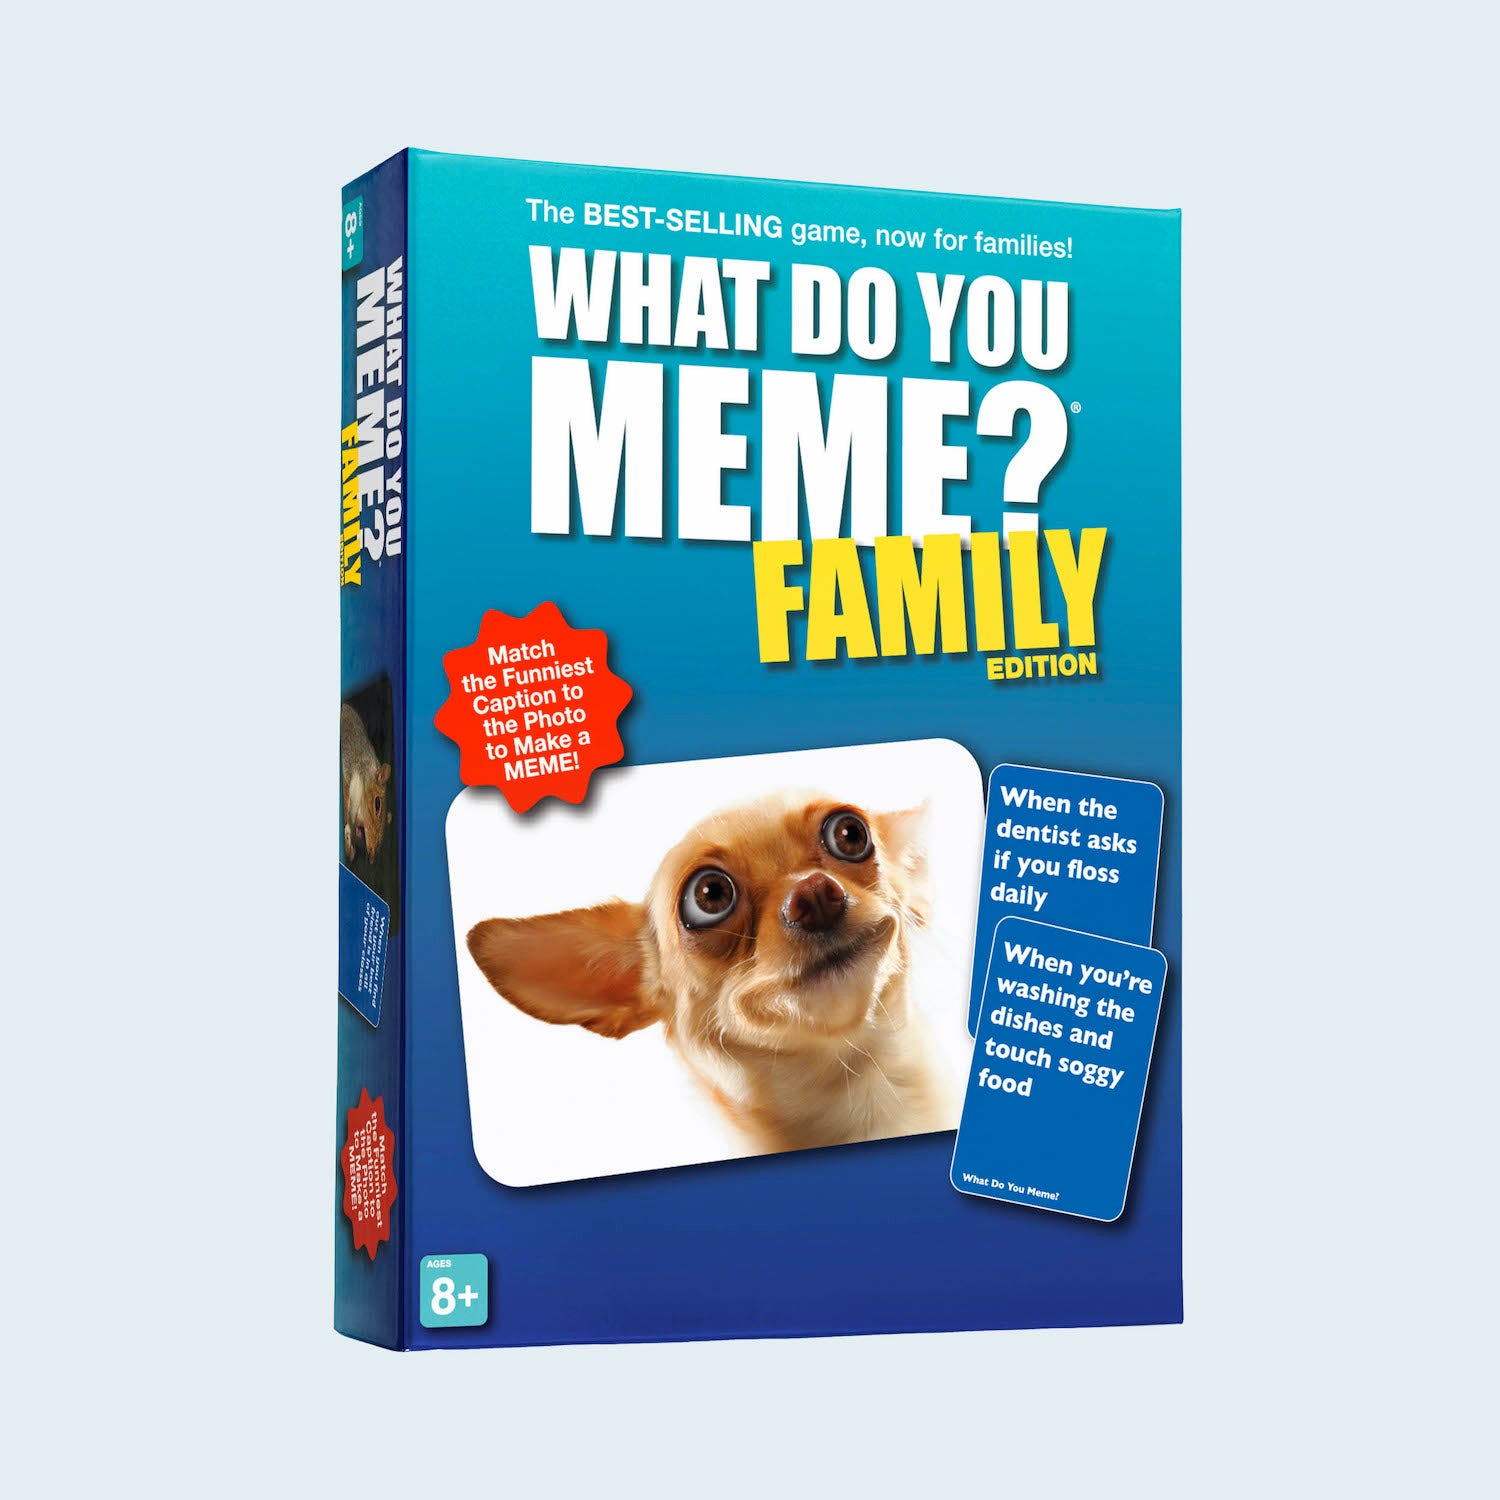 what-do-you-meme-family-edition-game-box-and-game-play-02-what-do-you-meme-by-relatable